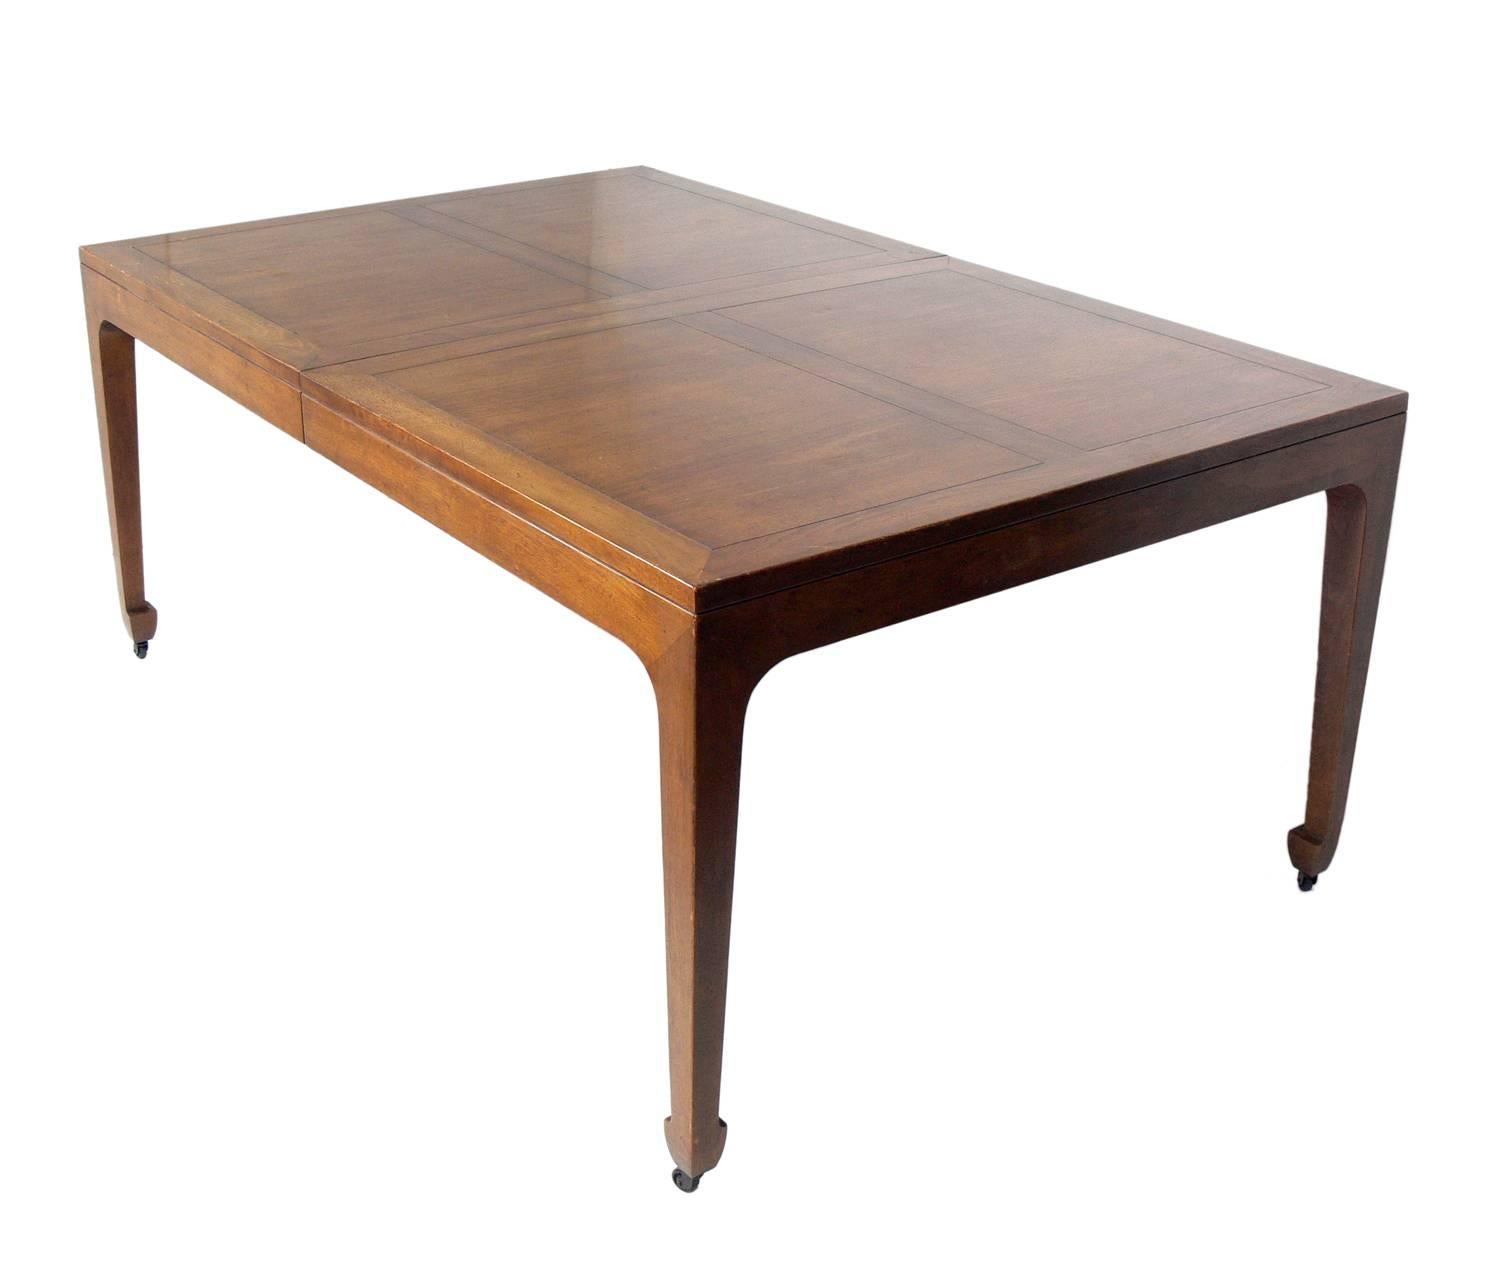 Asian influenced dining table, designed by Michael Taylor for Baker, circa 1960s. Retains Baker tag underneath. This table is a versatile size and expands from 68.25 width to an impressive 122.25" width with all three leaves installed. It can